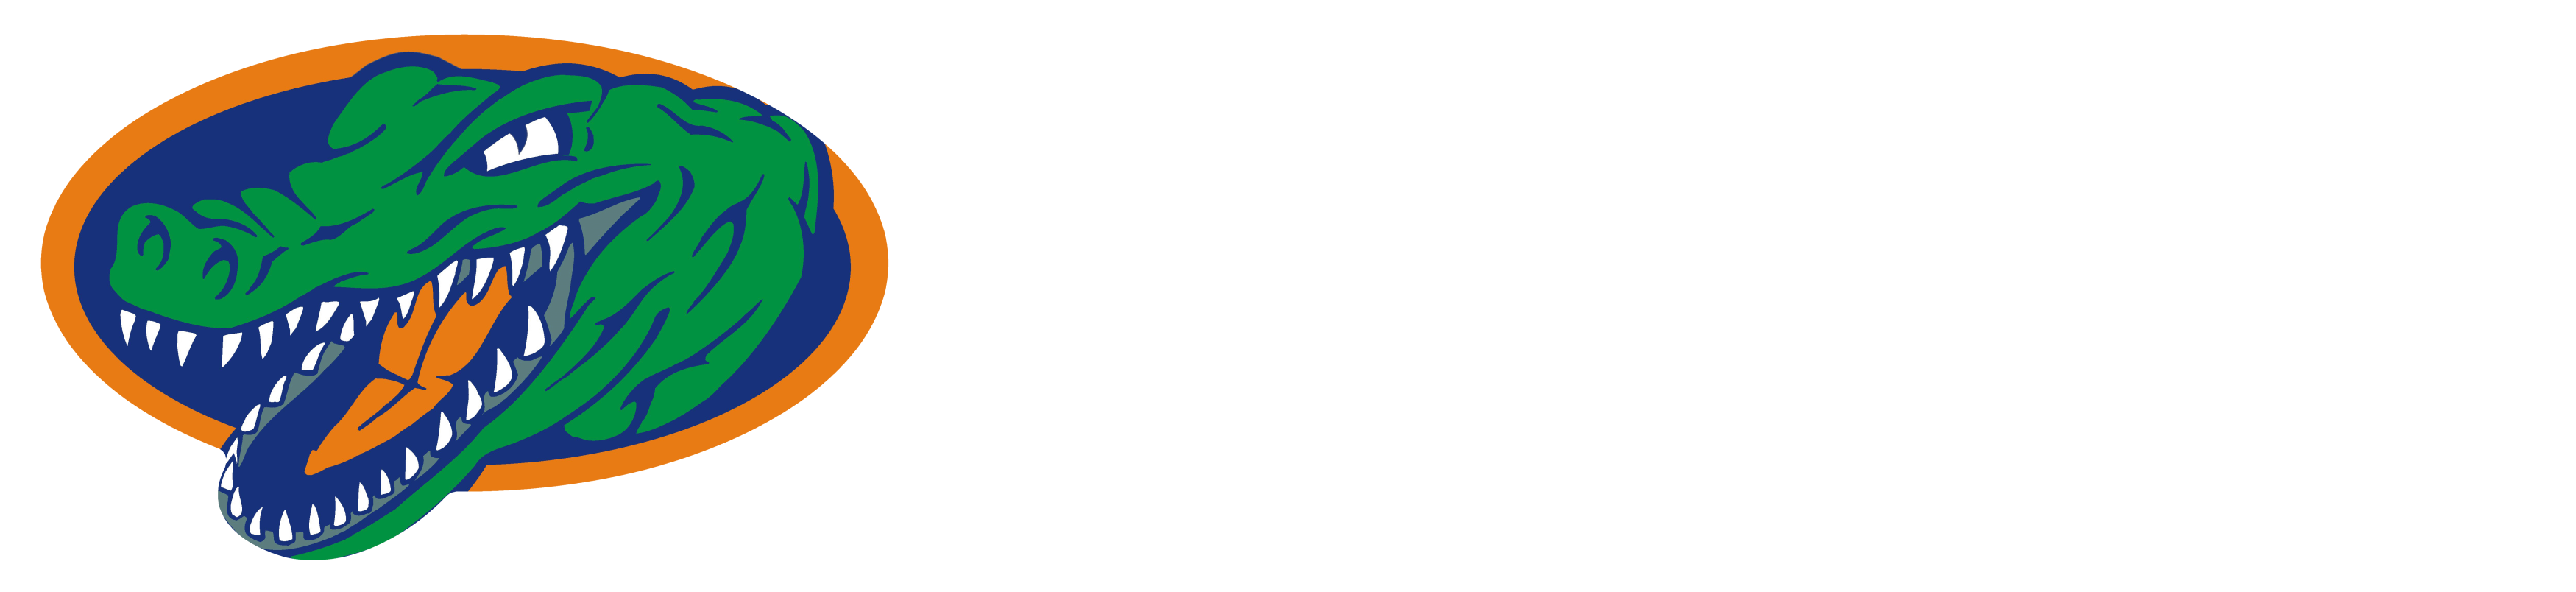 Footer Logo for Greenbrier Christian Academy